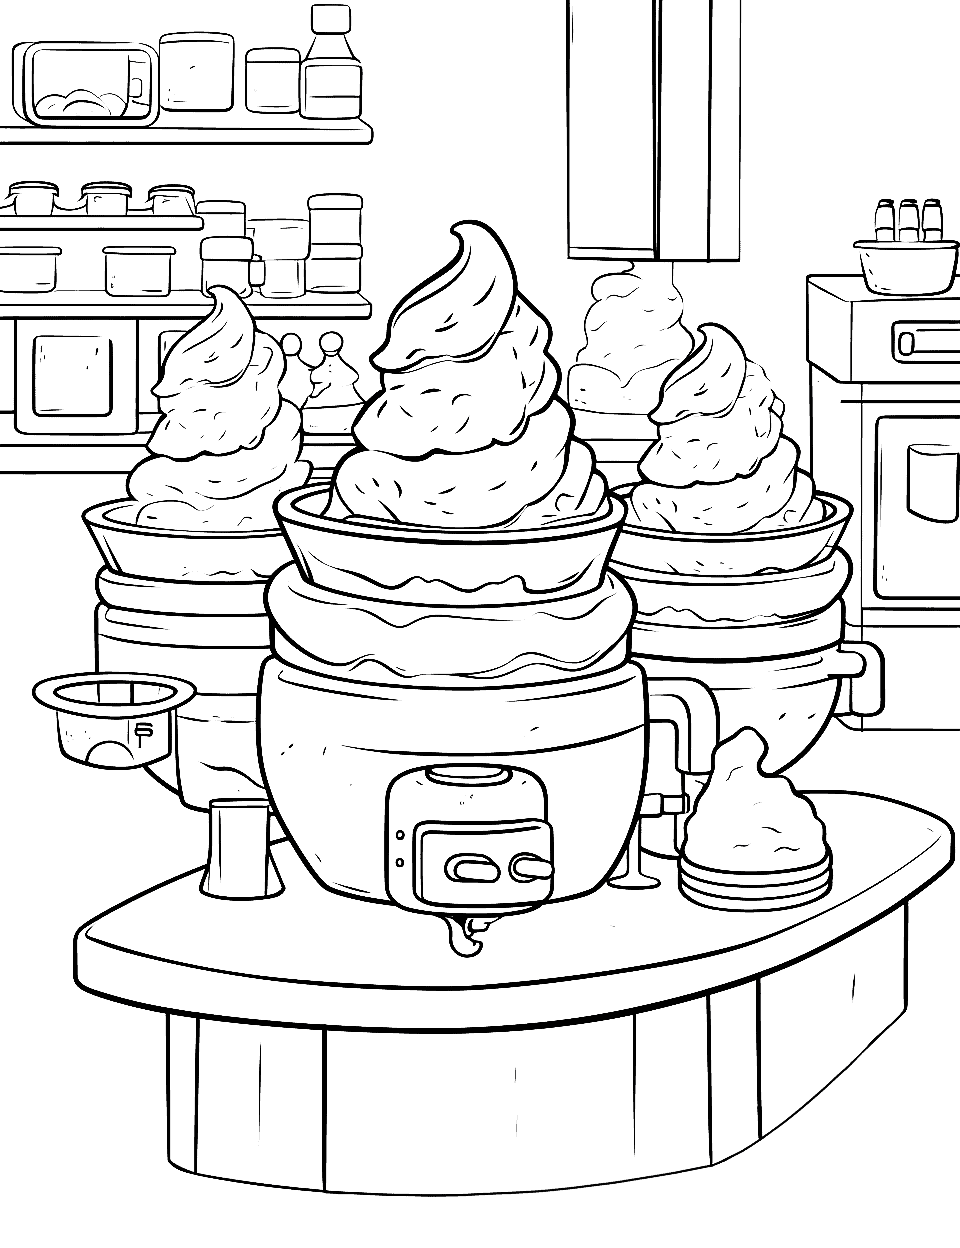 Ice Cream Machine Coloring Page - Machines making ice creams in a futuristic factory.